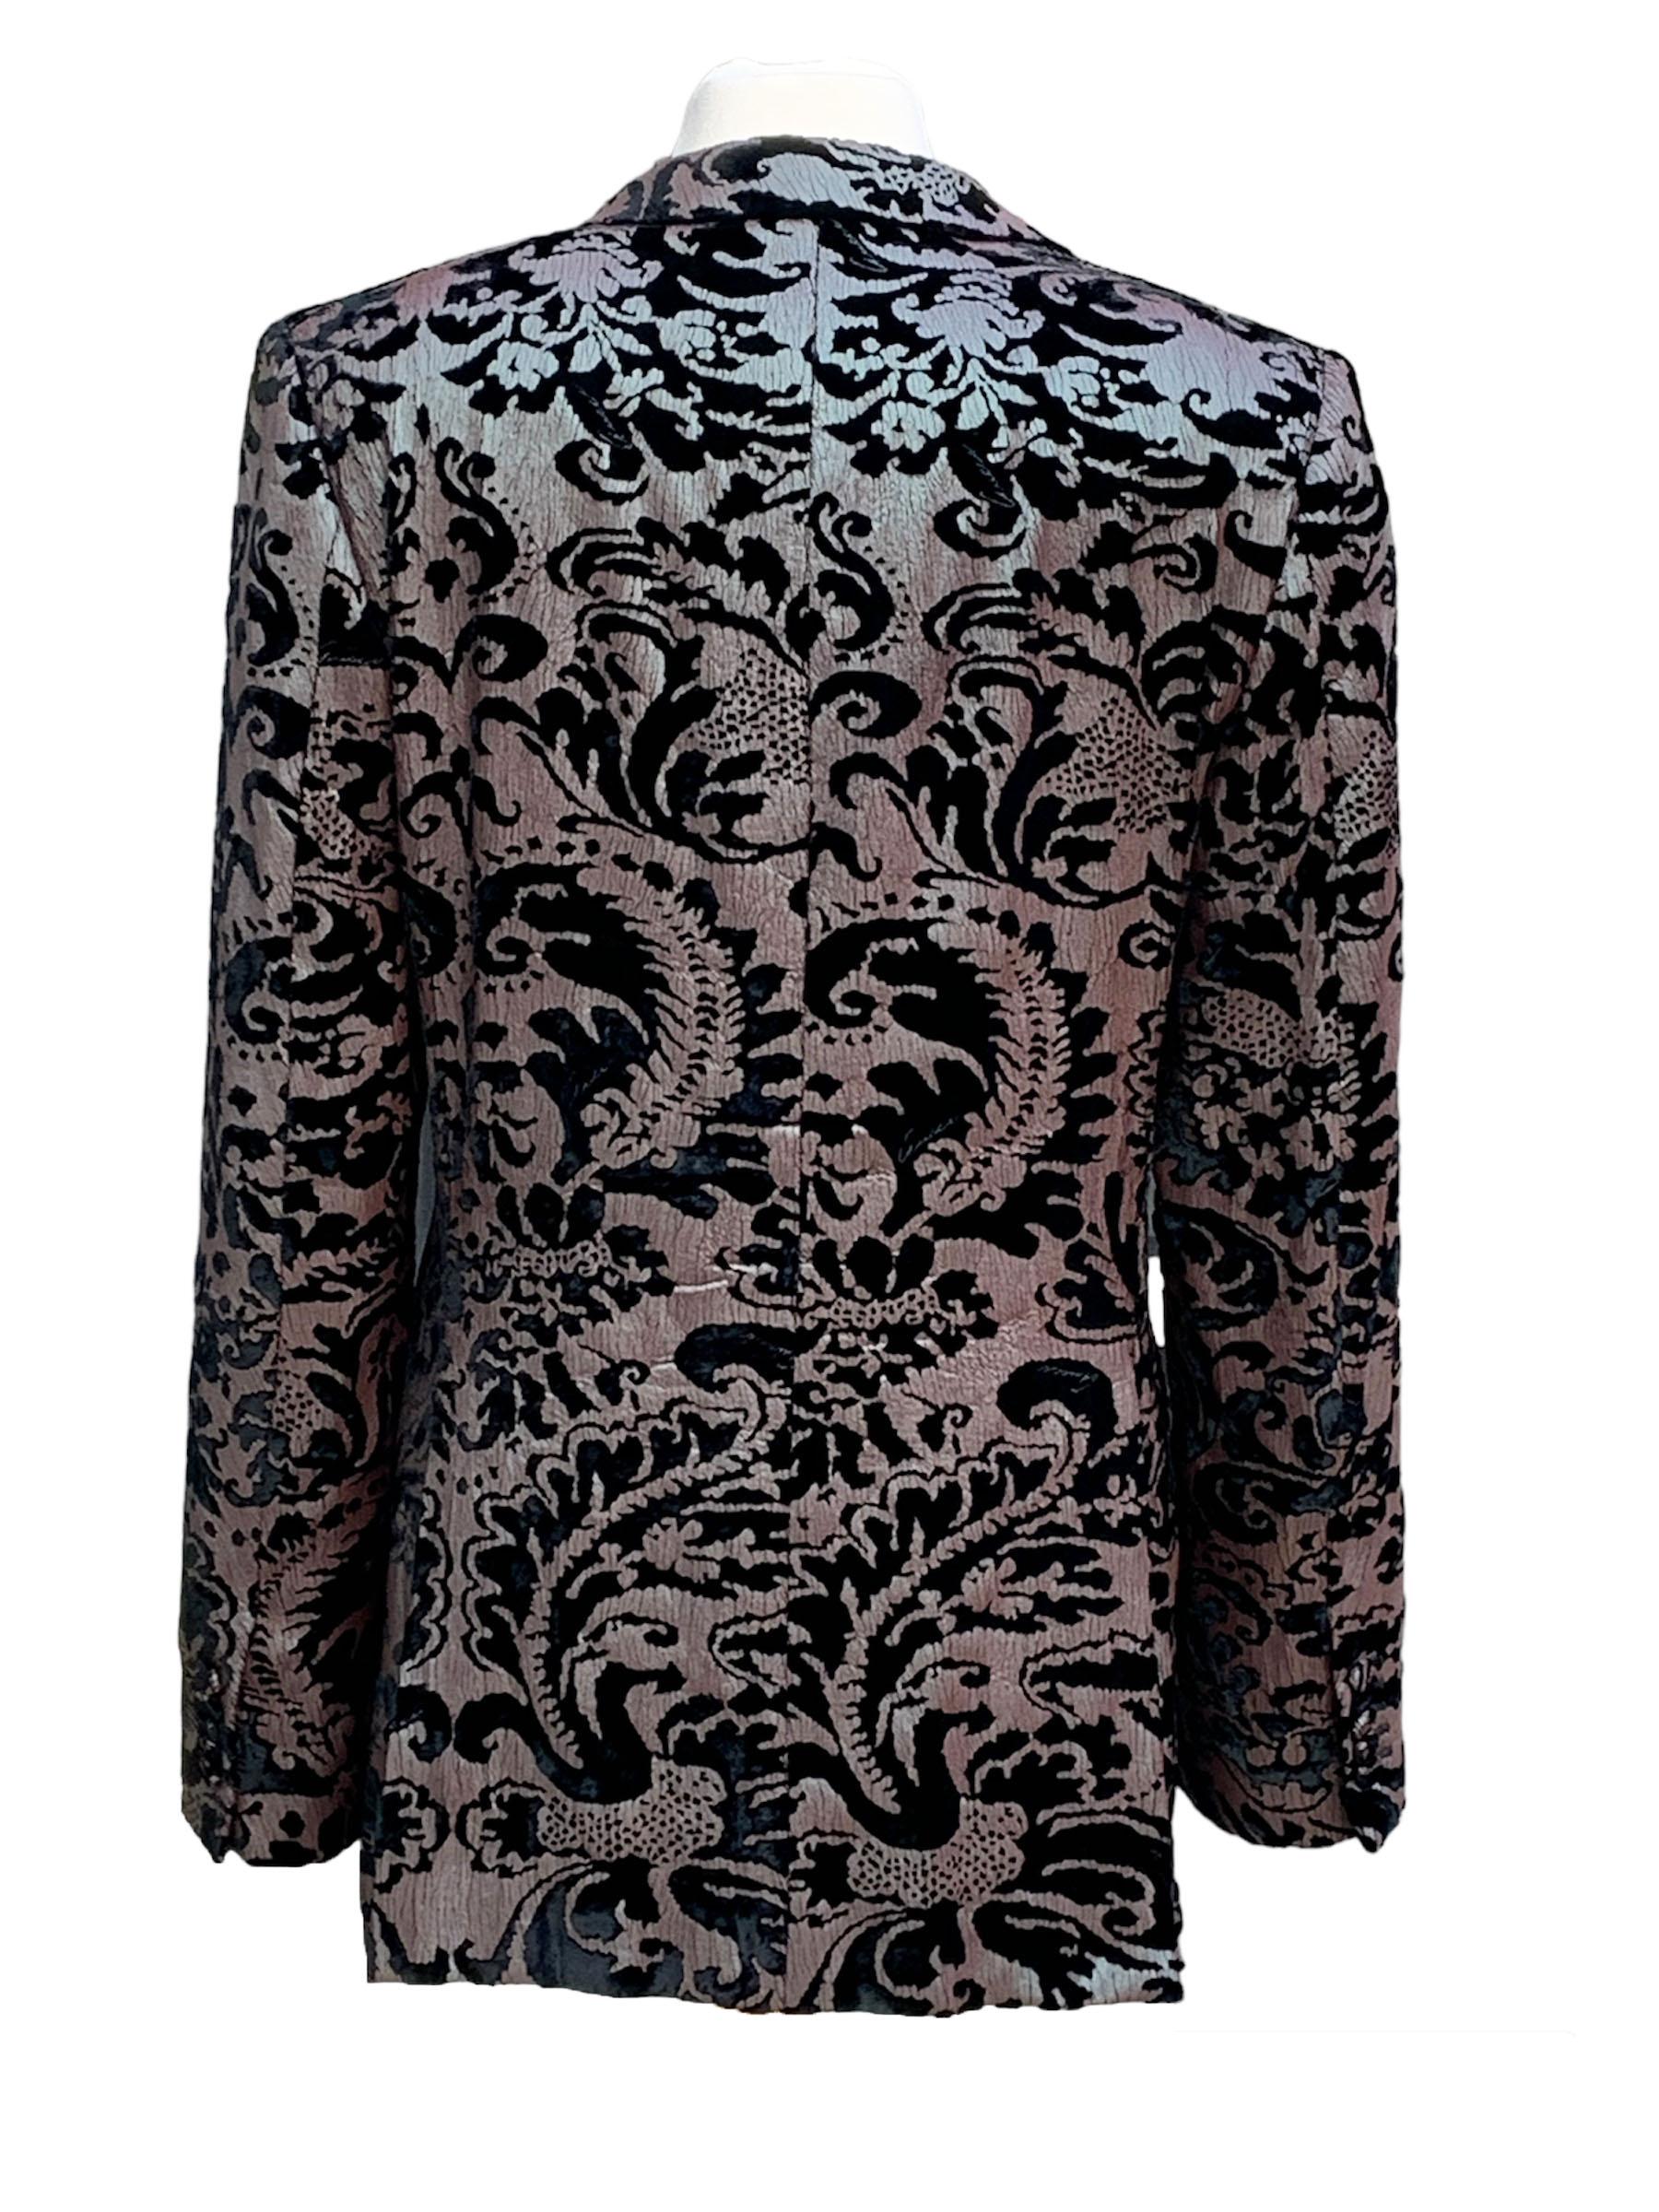 Tom Ford for Gucci SS 2000 Gothic Damask Iridescent Paint Velvet Blazer 48 US 38 In Excellent Condition For Sale In Montgomery, TX